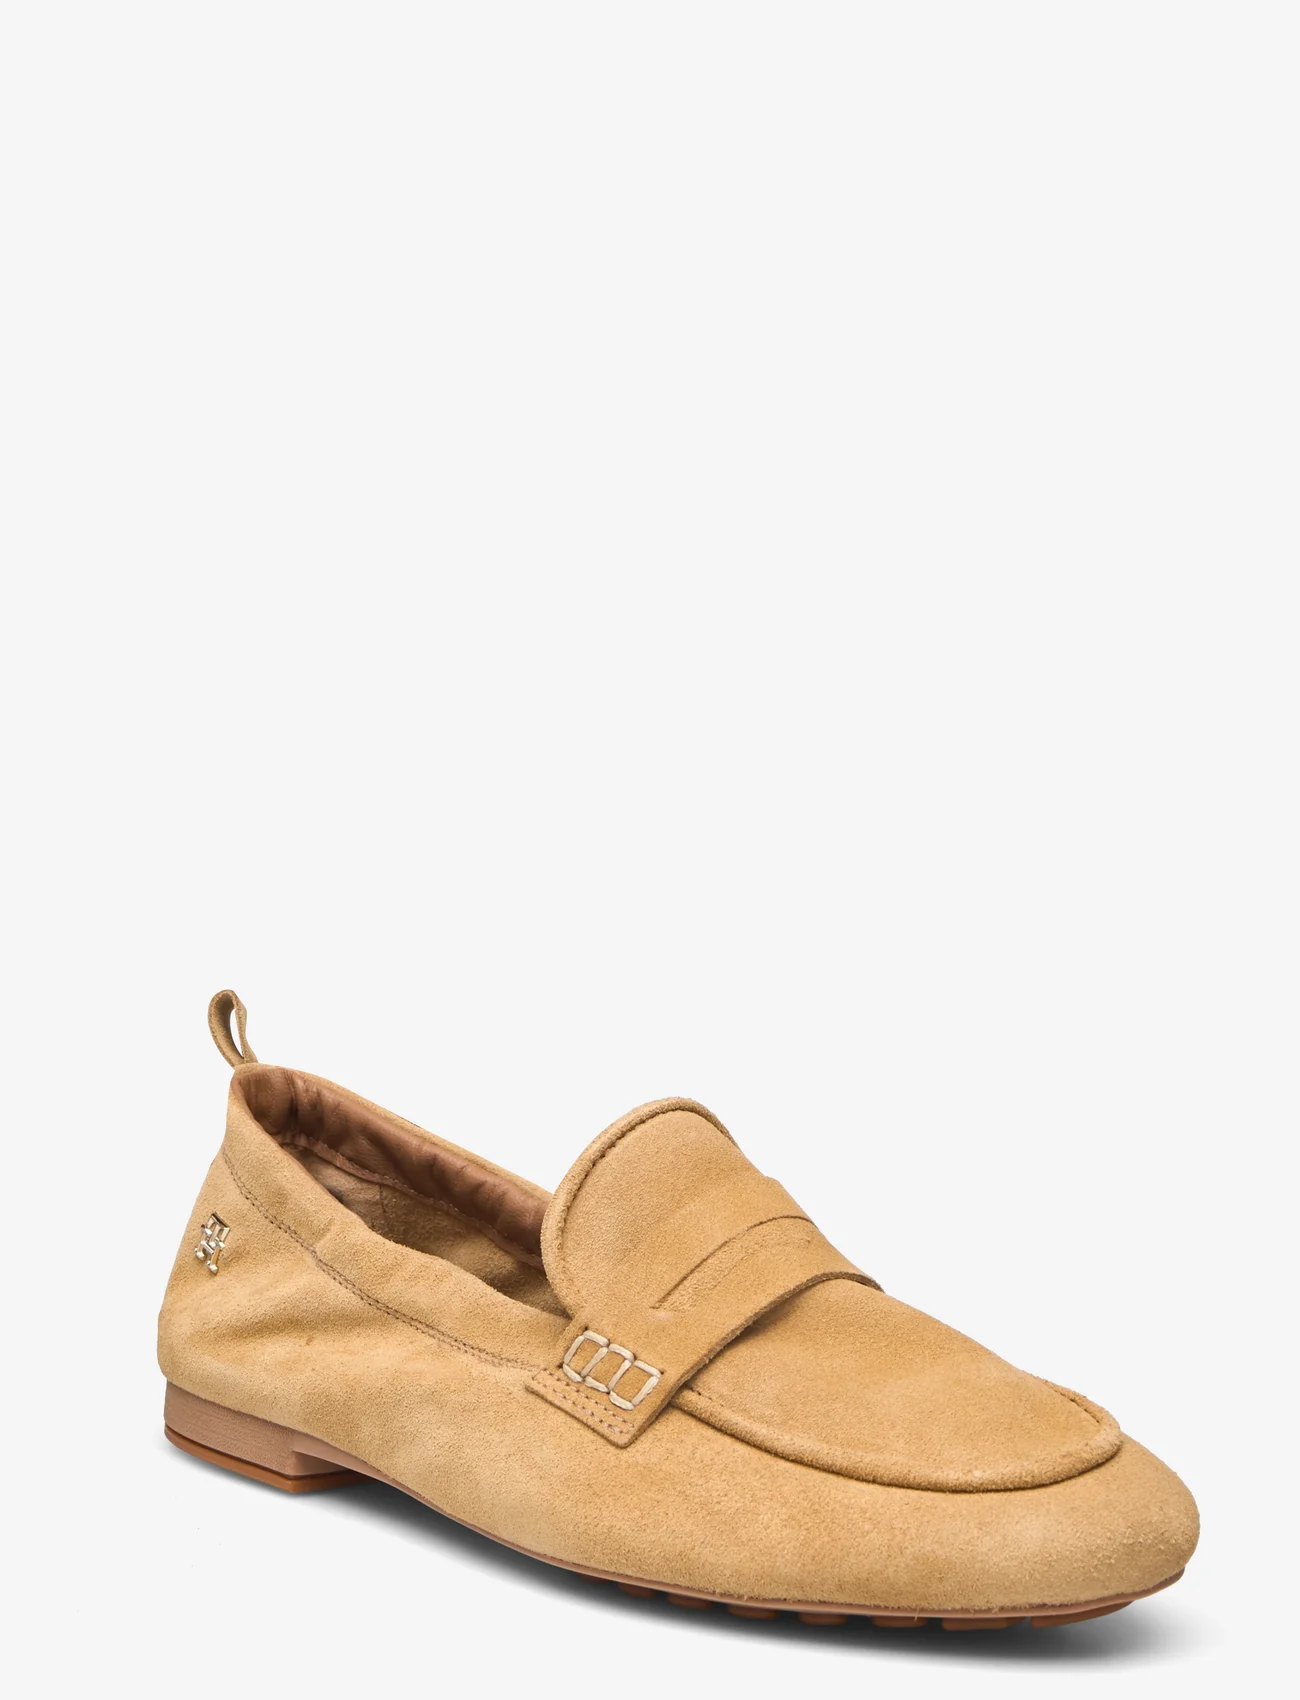 Tommy Hilfiger - TH SUEDE MOCCASIN - loafers - classic khaki - 0